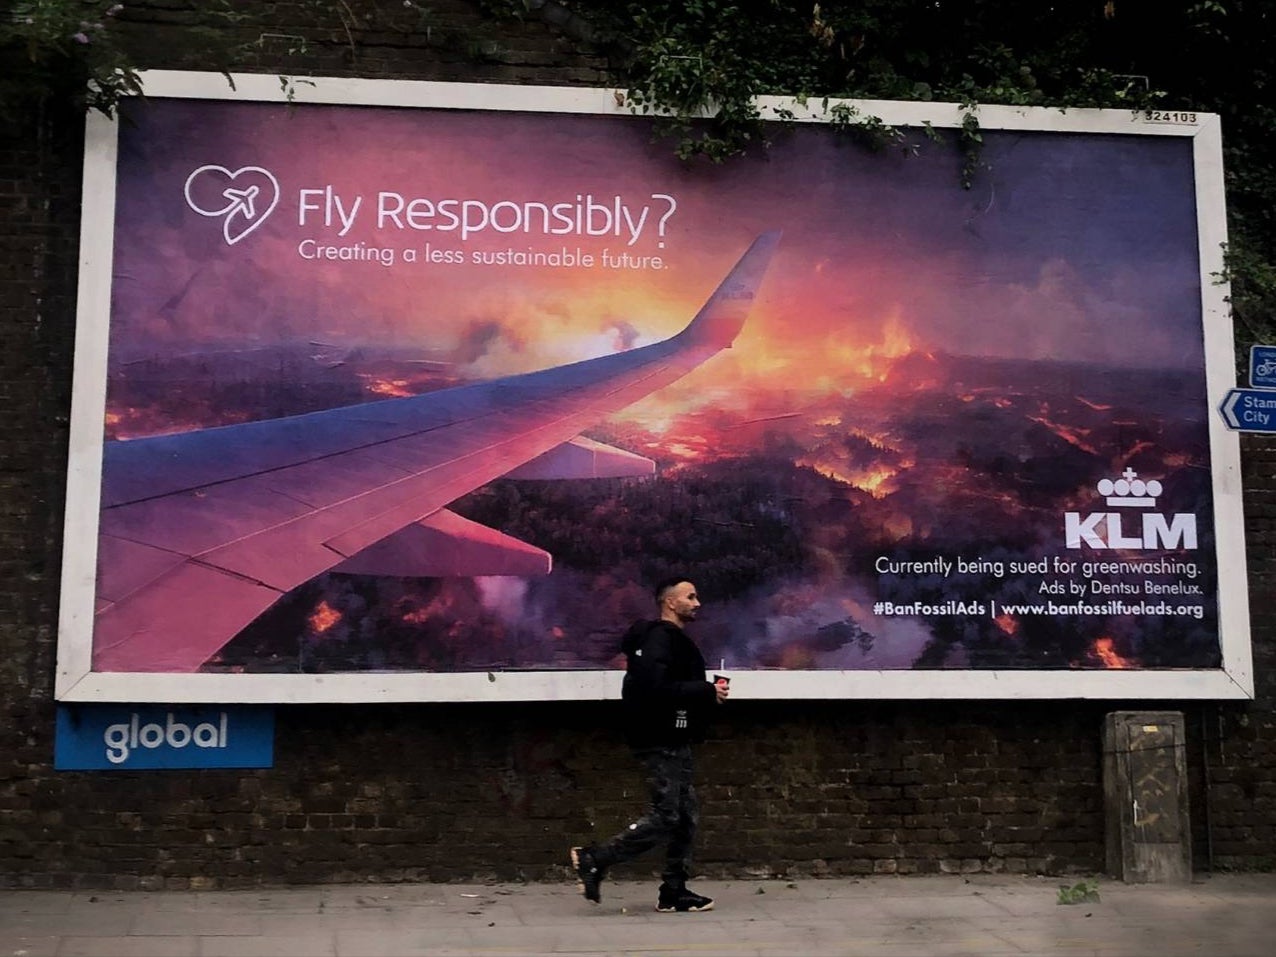 Michelle Tylicki’s “KLM” advert shows a plane flying over raging wildfires